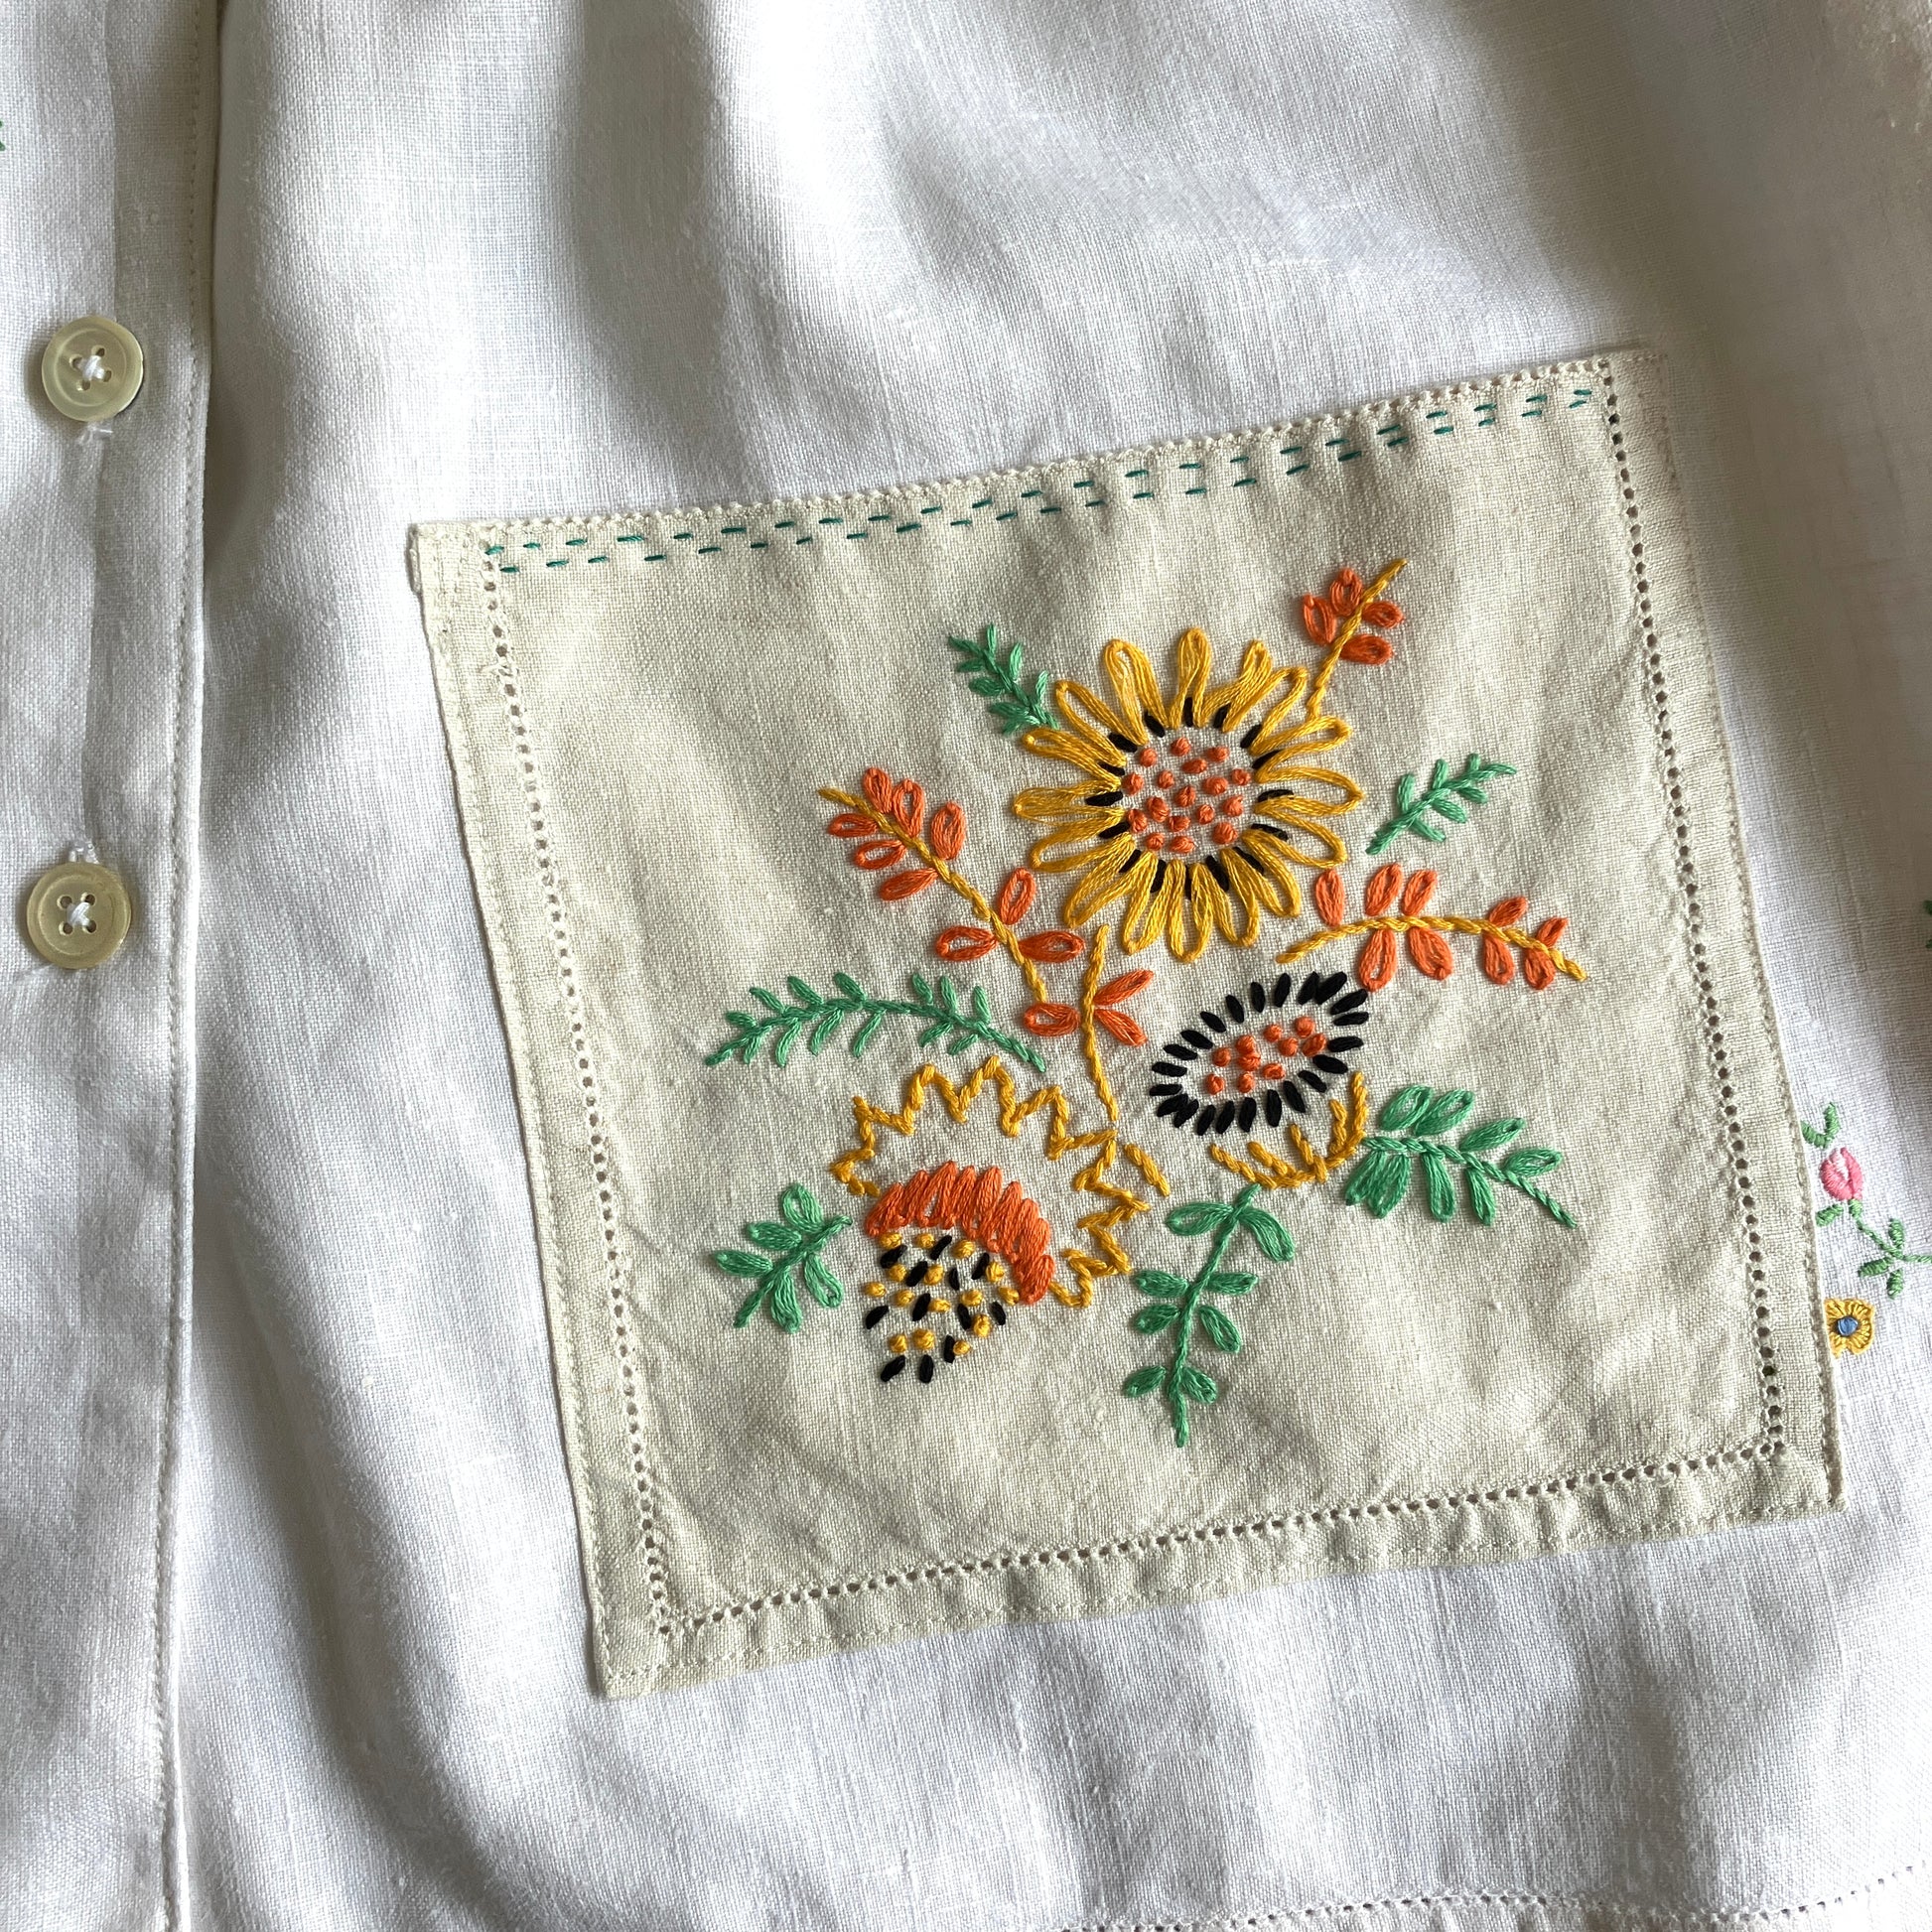 Short sleeved shirt made from a patchwork of reclaimed tablecloths with a traditional English pub with a thatched roof embroidered on the front and two bows on the yoke (detail of pocket)